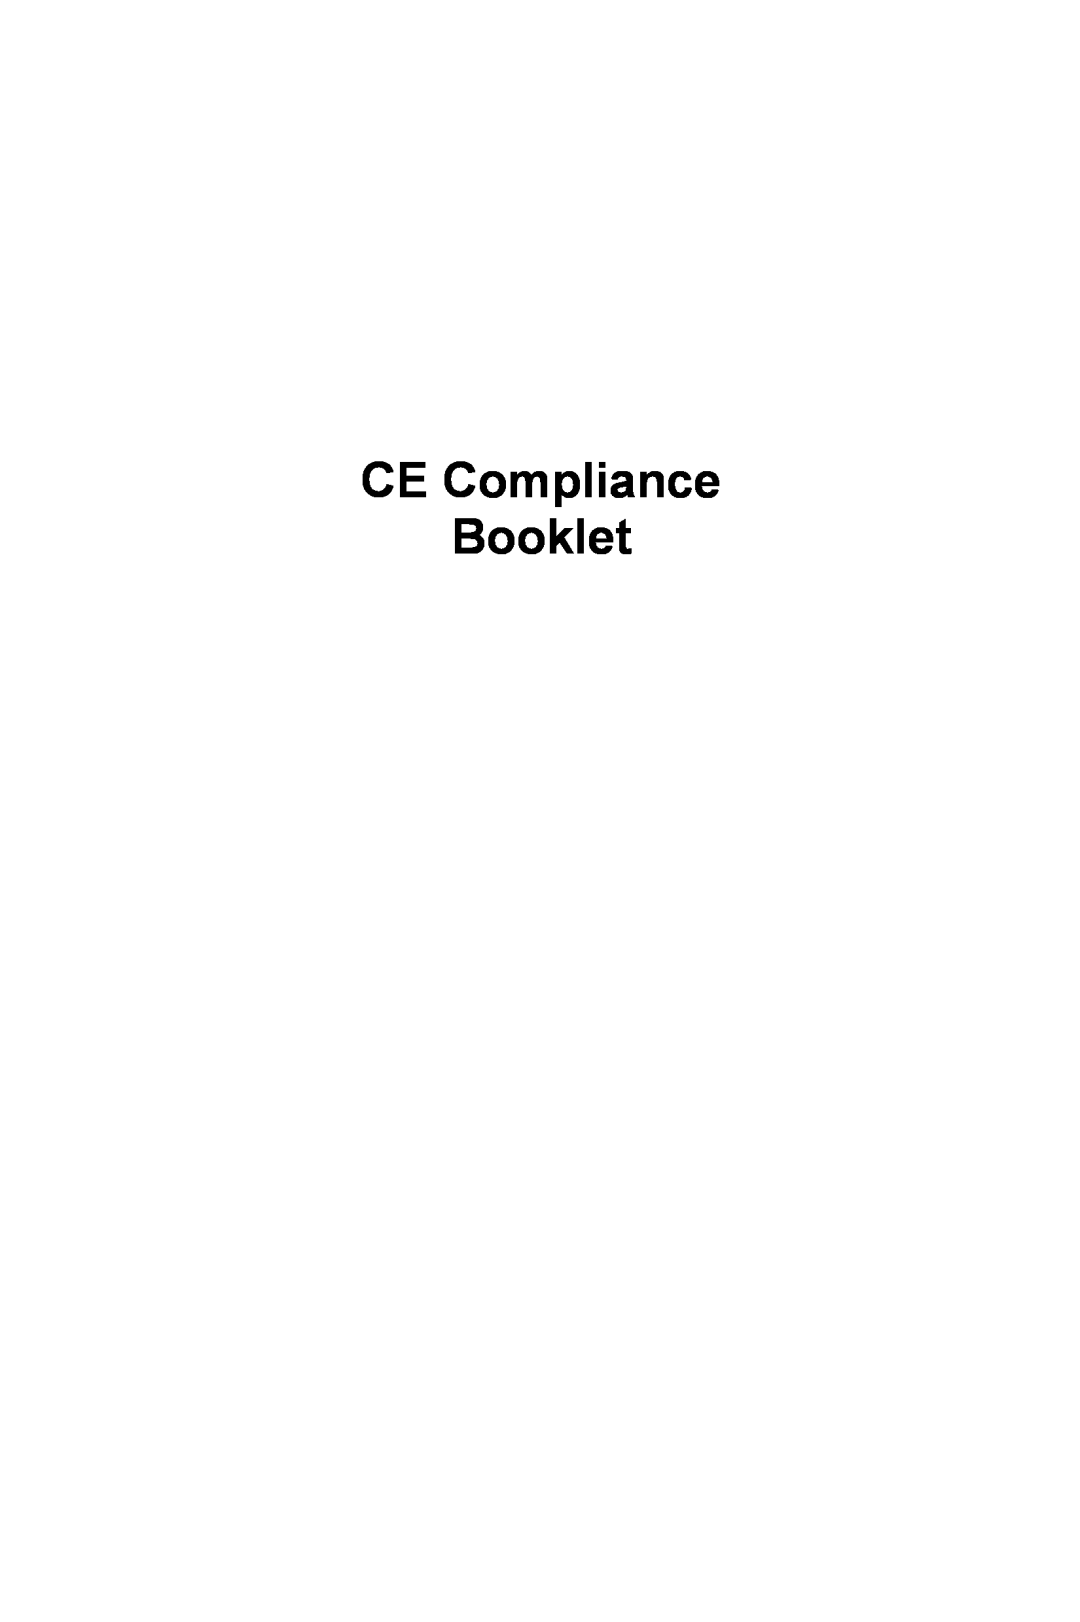 MSI US60G manual CE Compliance Booklet 